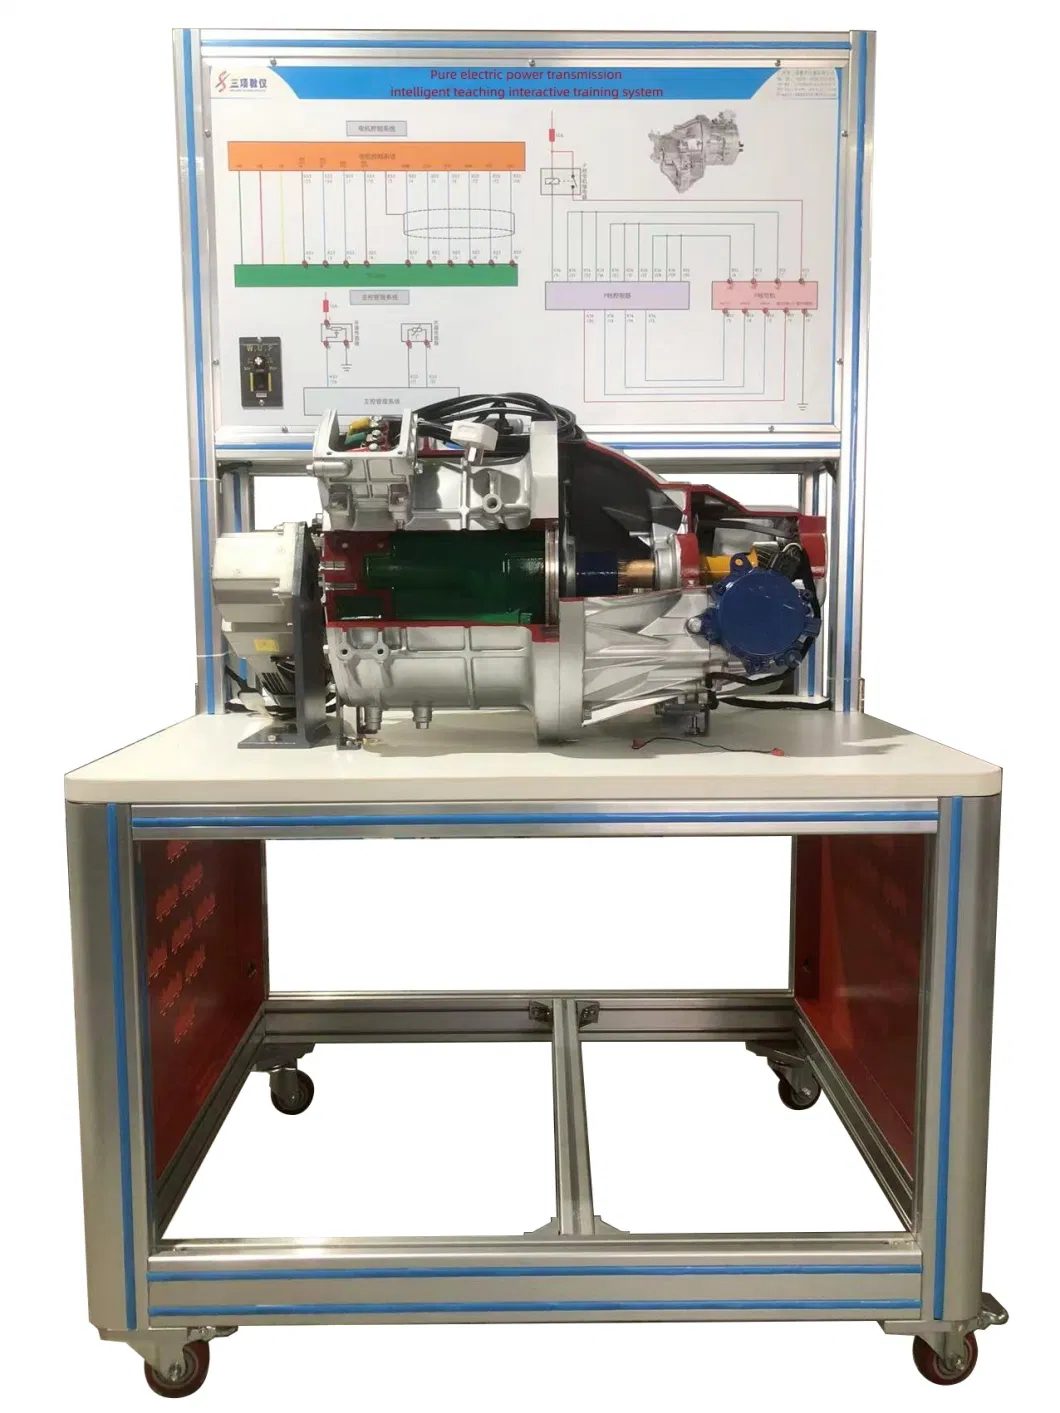 Power Battery Module (Cylindrical Electric Cell) Testing Platform Automotive Educational Equipment